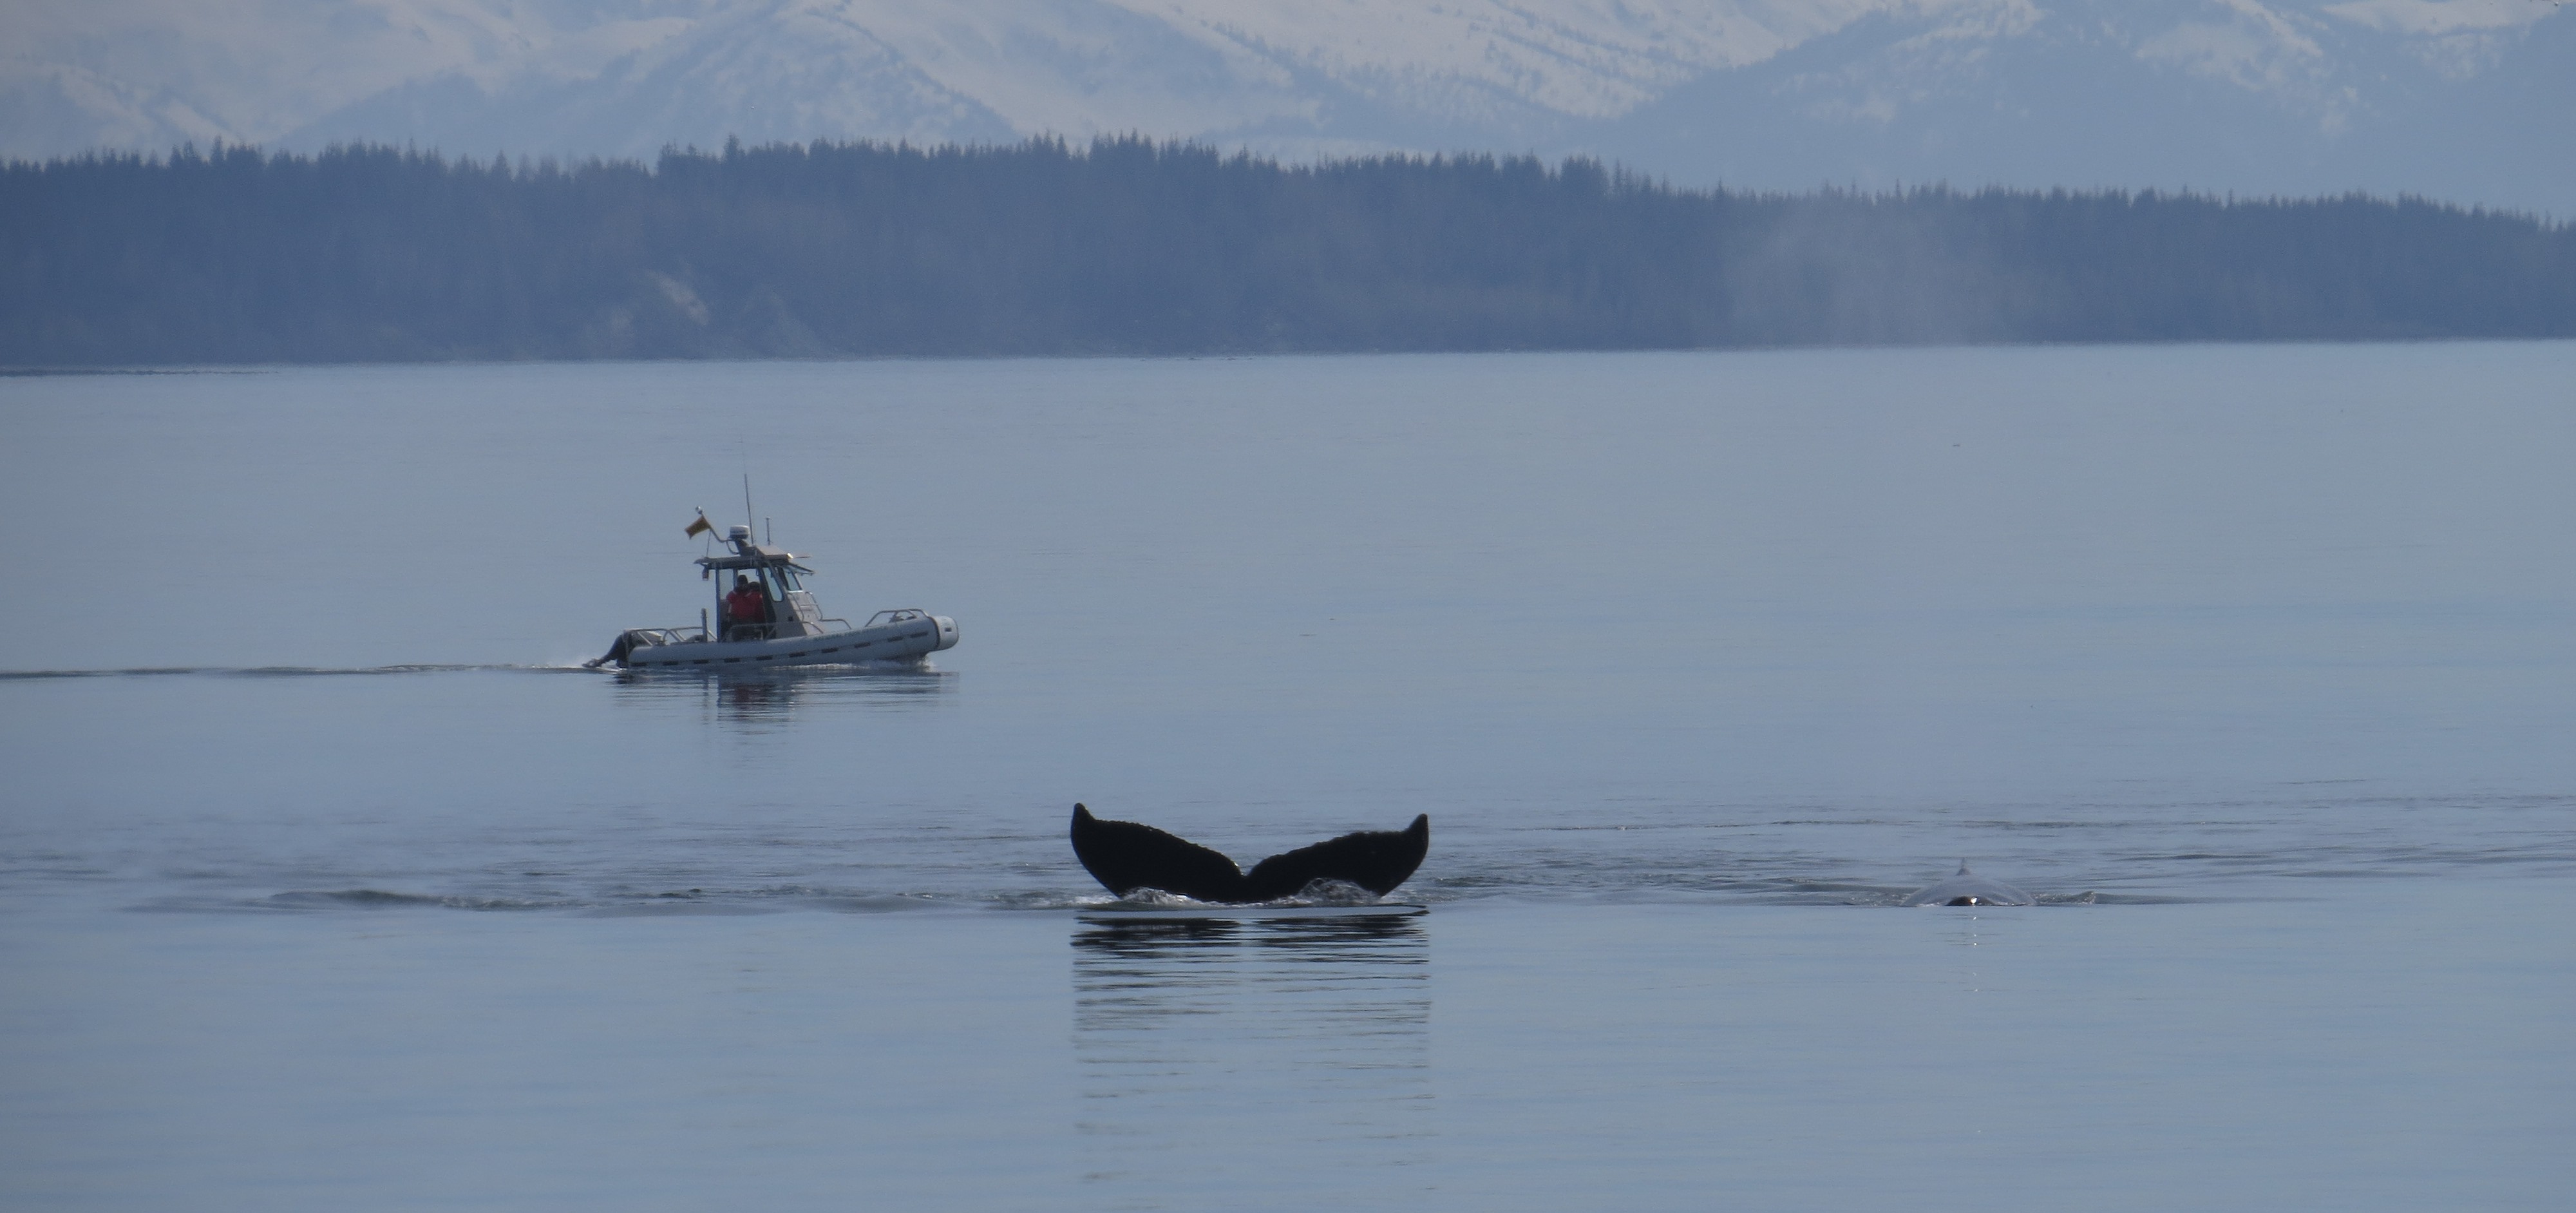 Research vessel and humpback whale